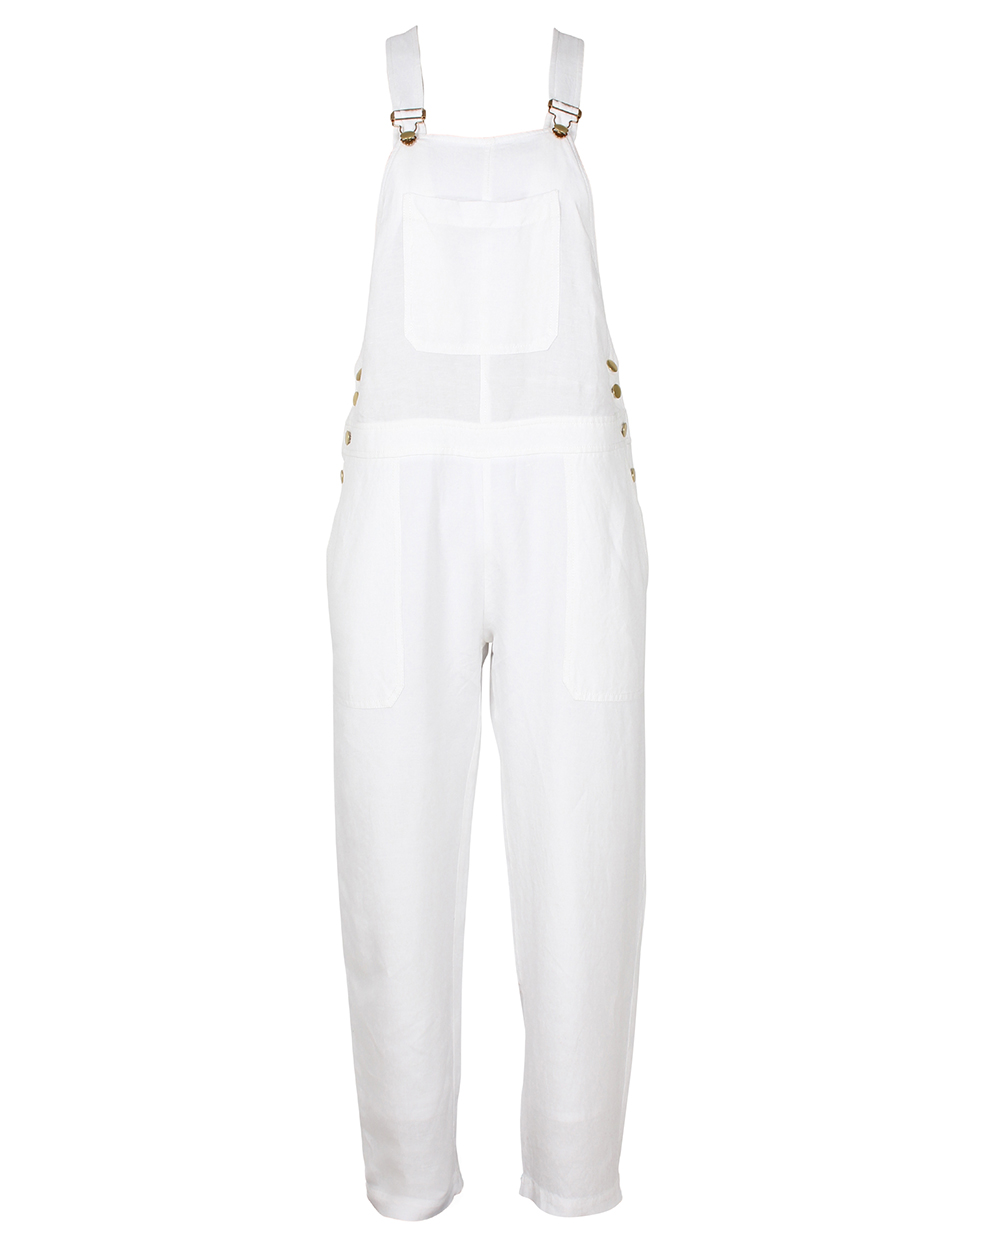 Overalls, $99 from Ruby